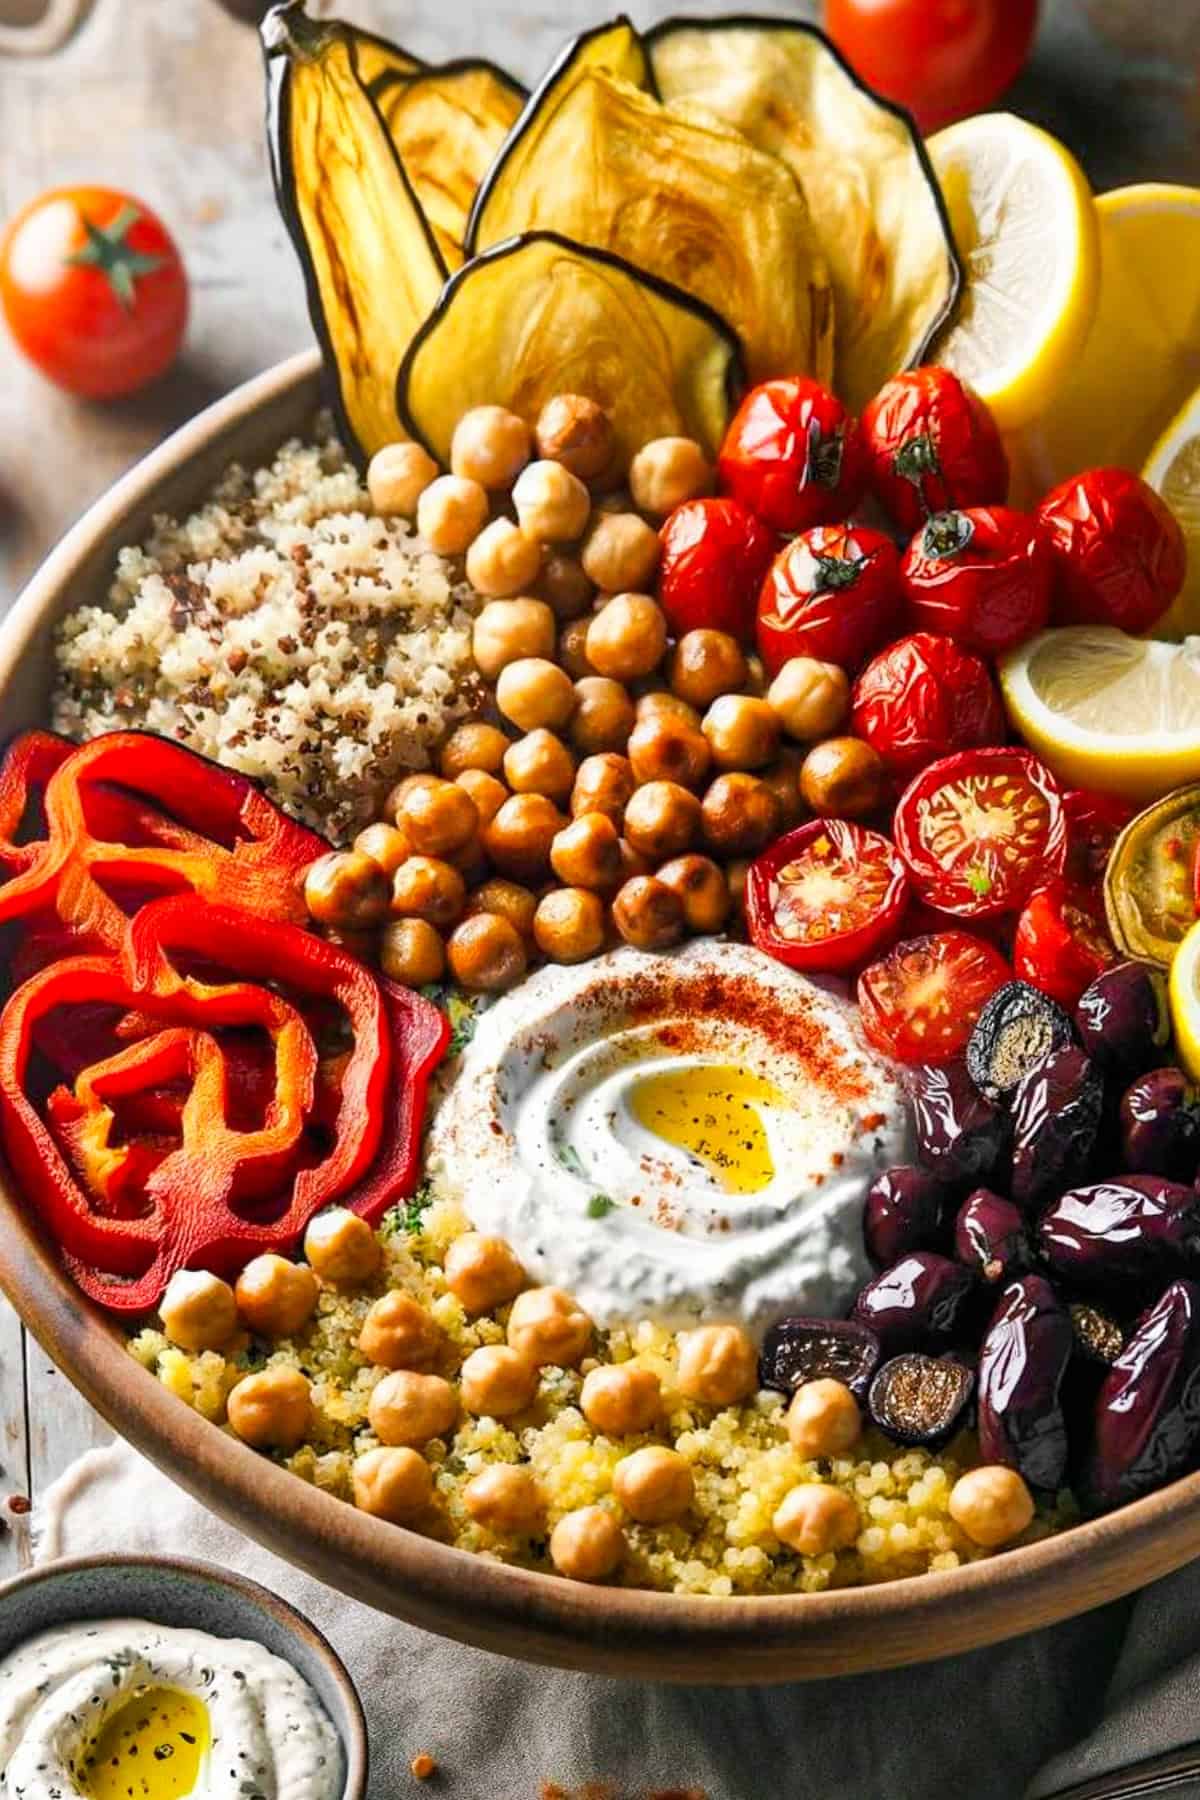 Up close photo of a Mediterranean grain bowl with quinoa, chickpeas, sliced red peppers, halved cherry tomatoes, cucumbers, olives, and tzatziki.